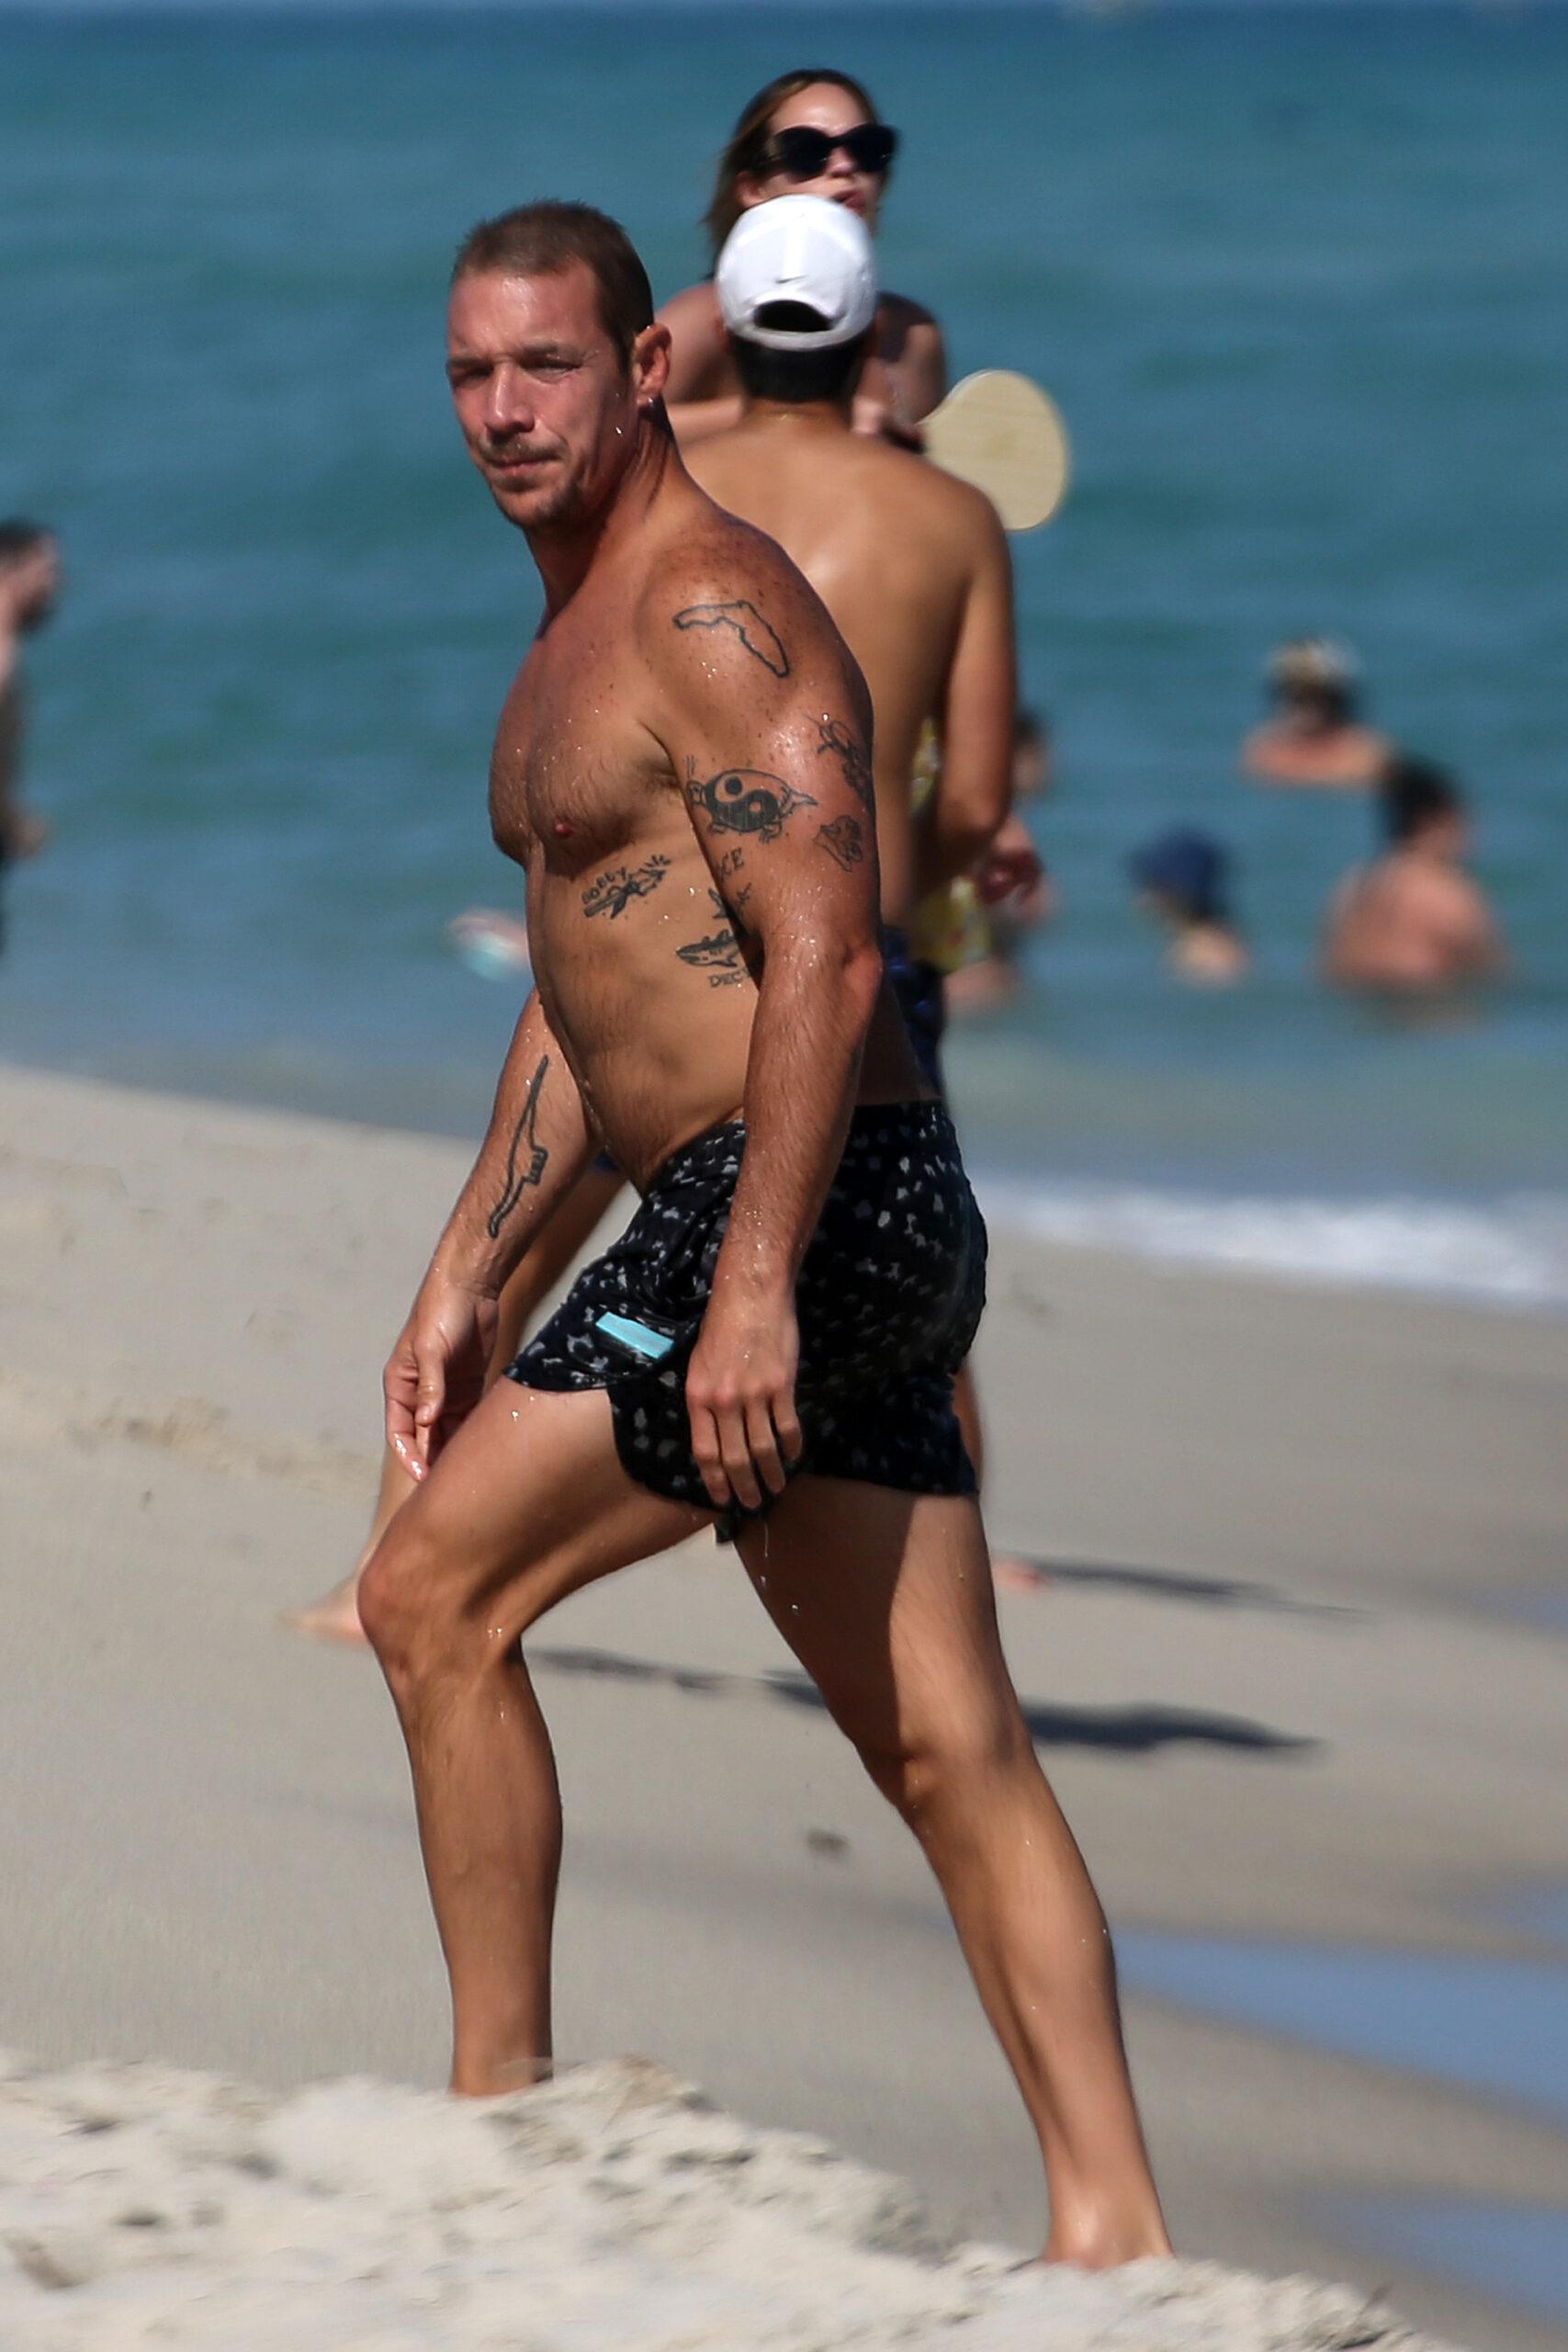 Shirtless DJ Diplo does some awkward looking exercises in the sand before chatting up billionaire developer Alan Faena on the beach in Miami